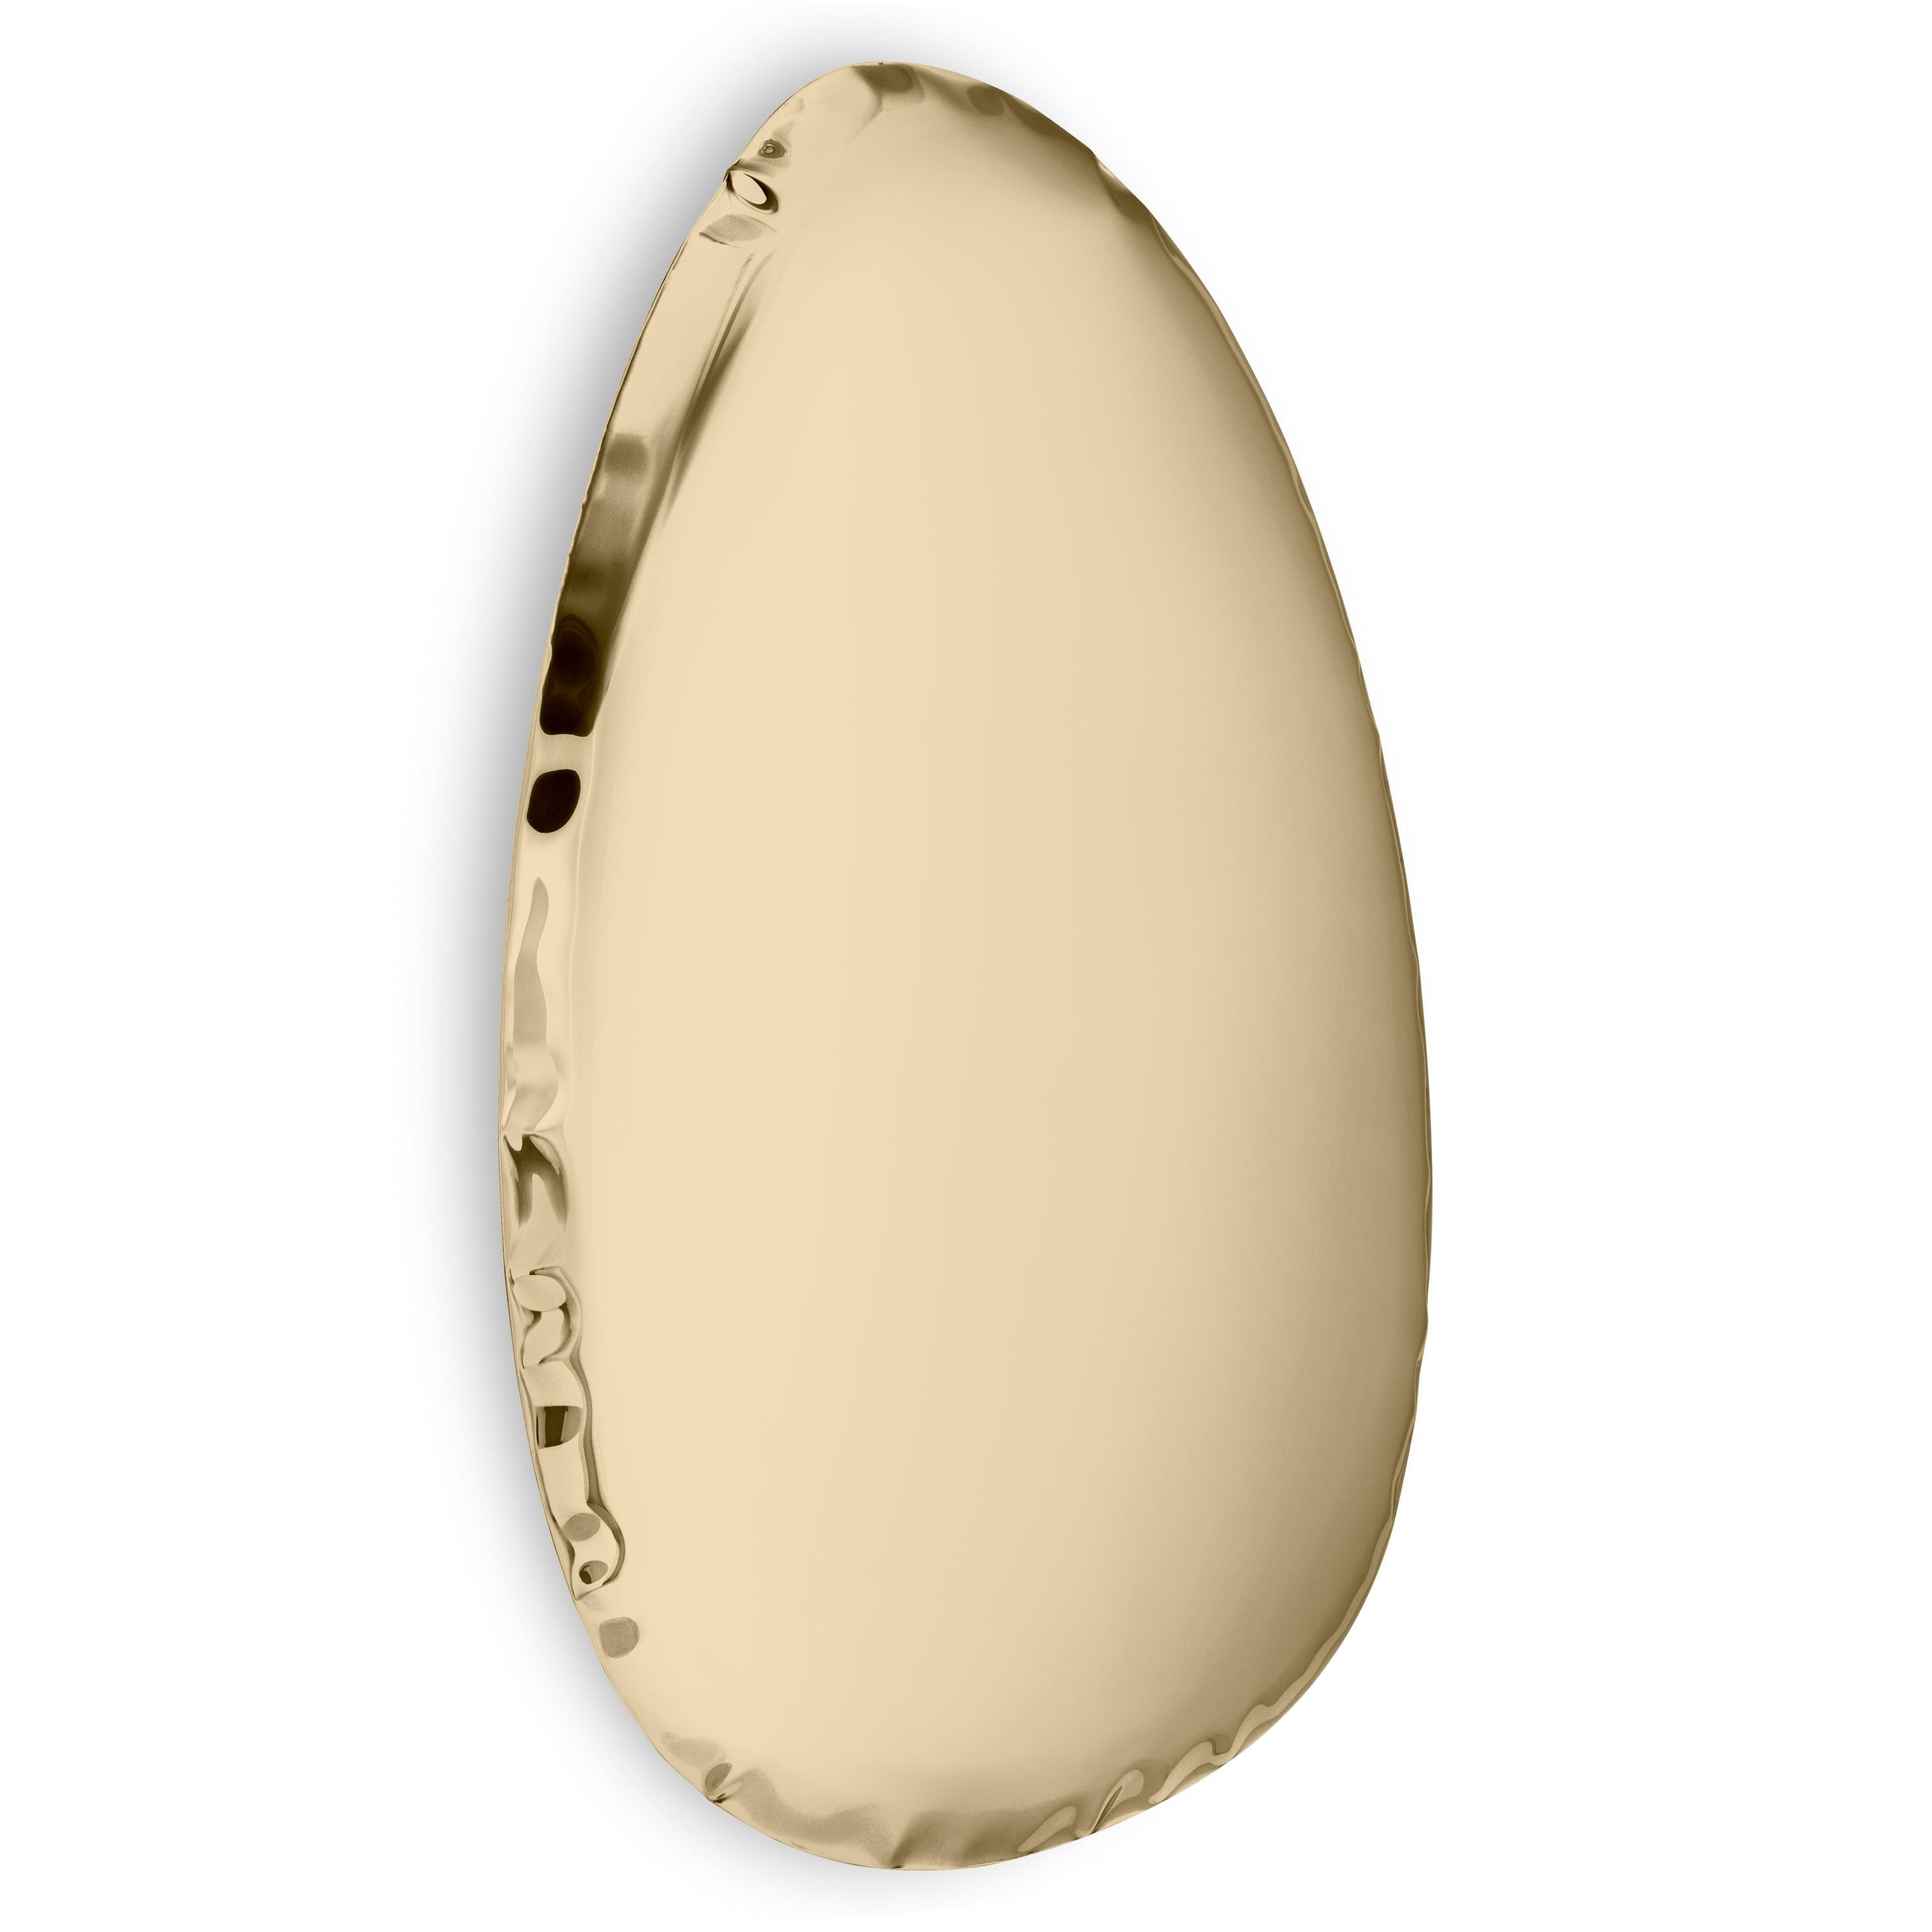 Polished Contemporary Mirror 'Tafla O4.5', AURUM Collection, Light Gold, by Zieta For Sale